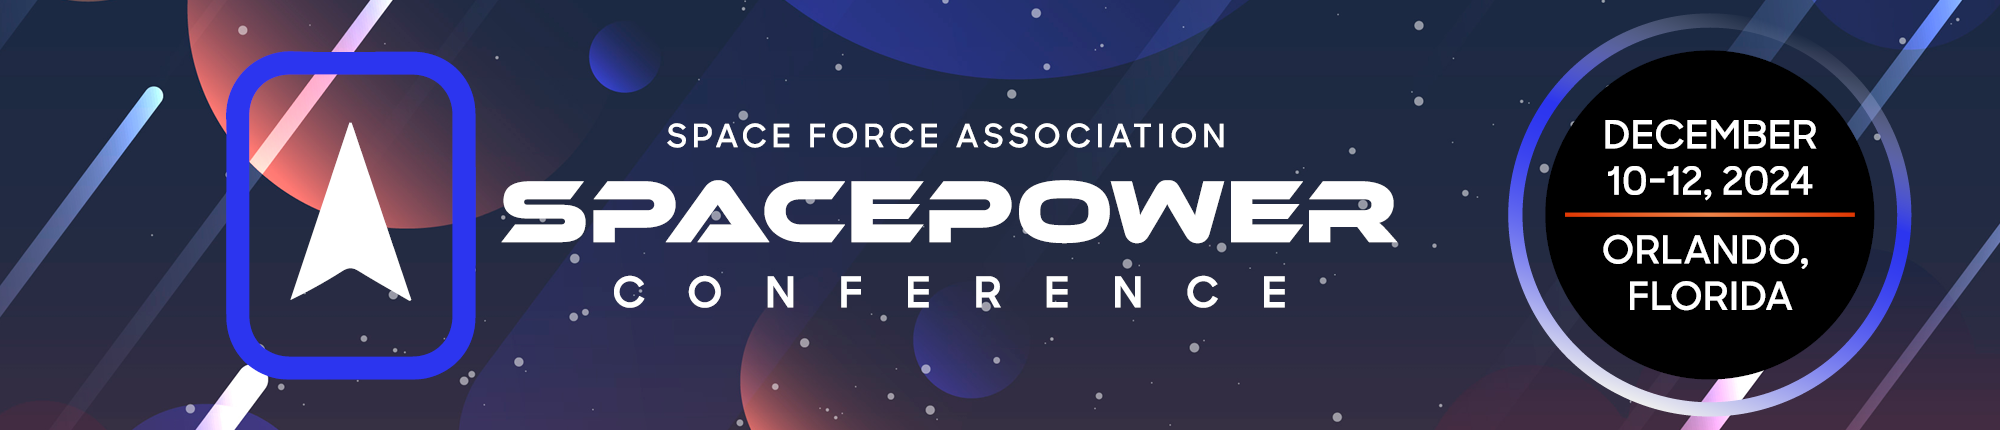 Spacepower Conference